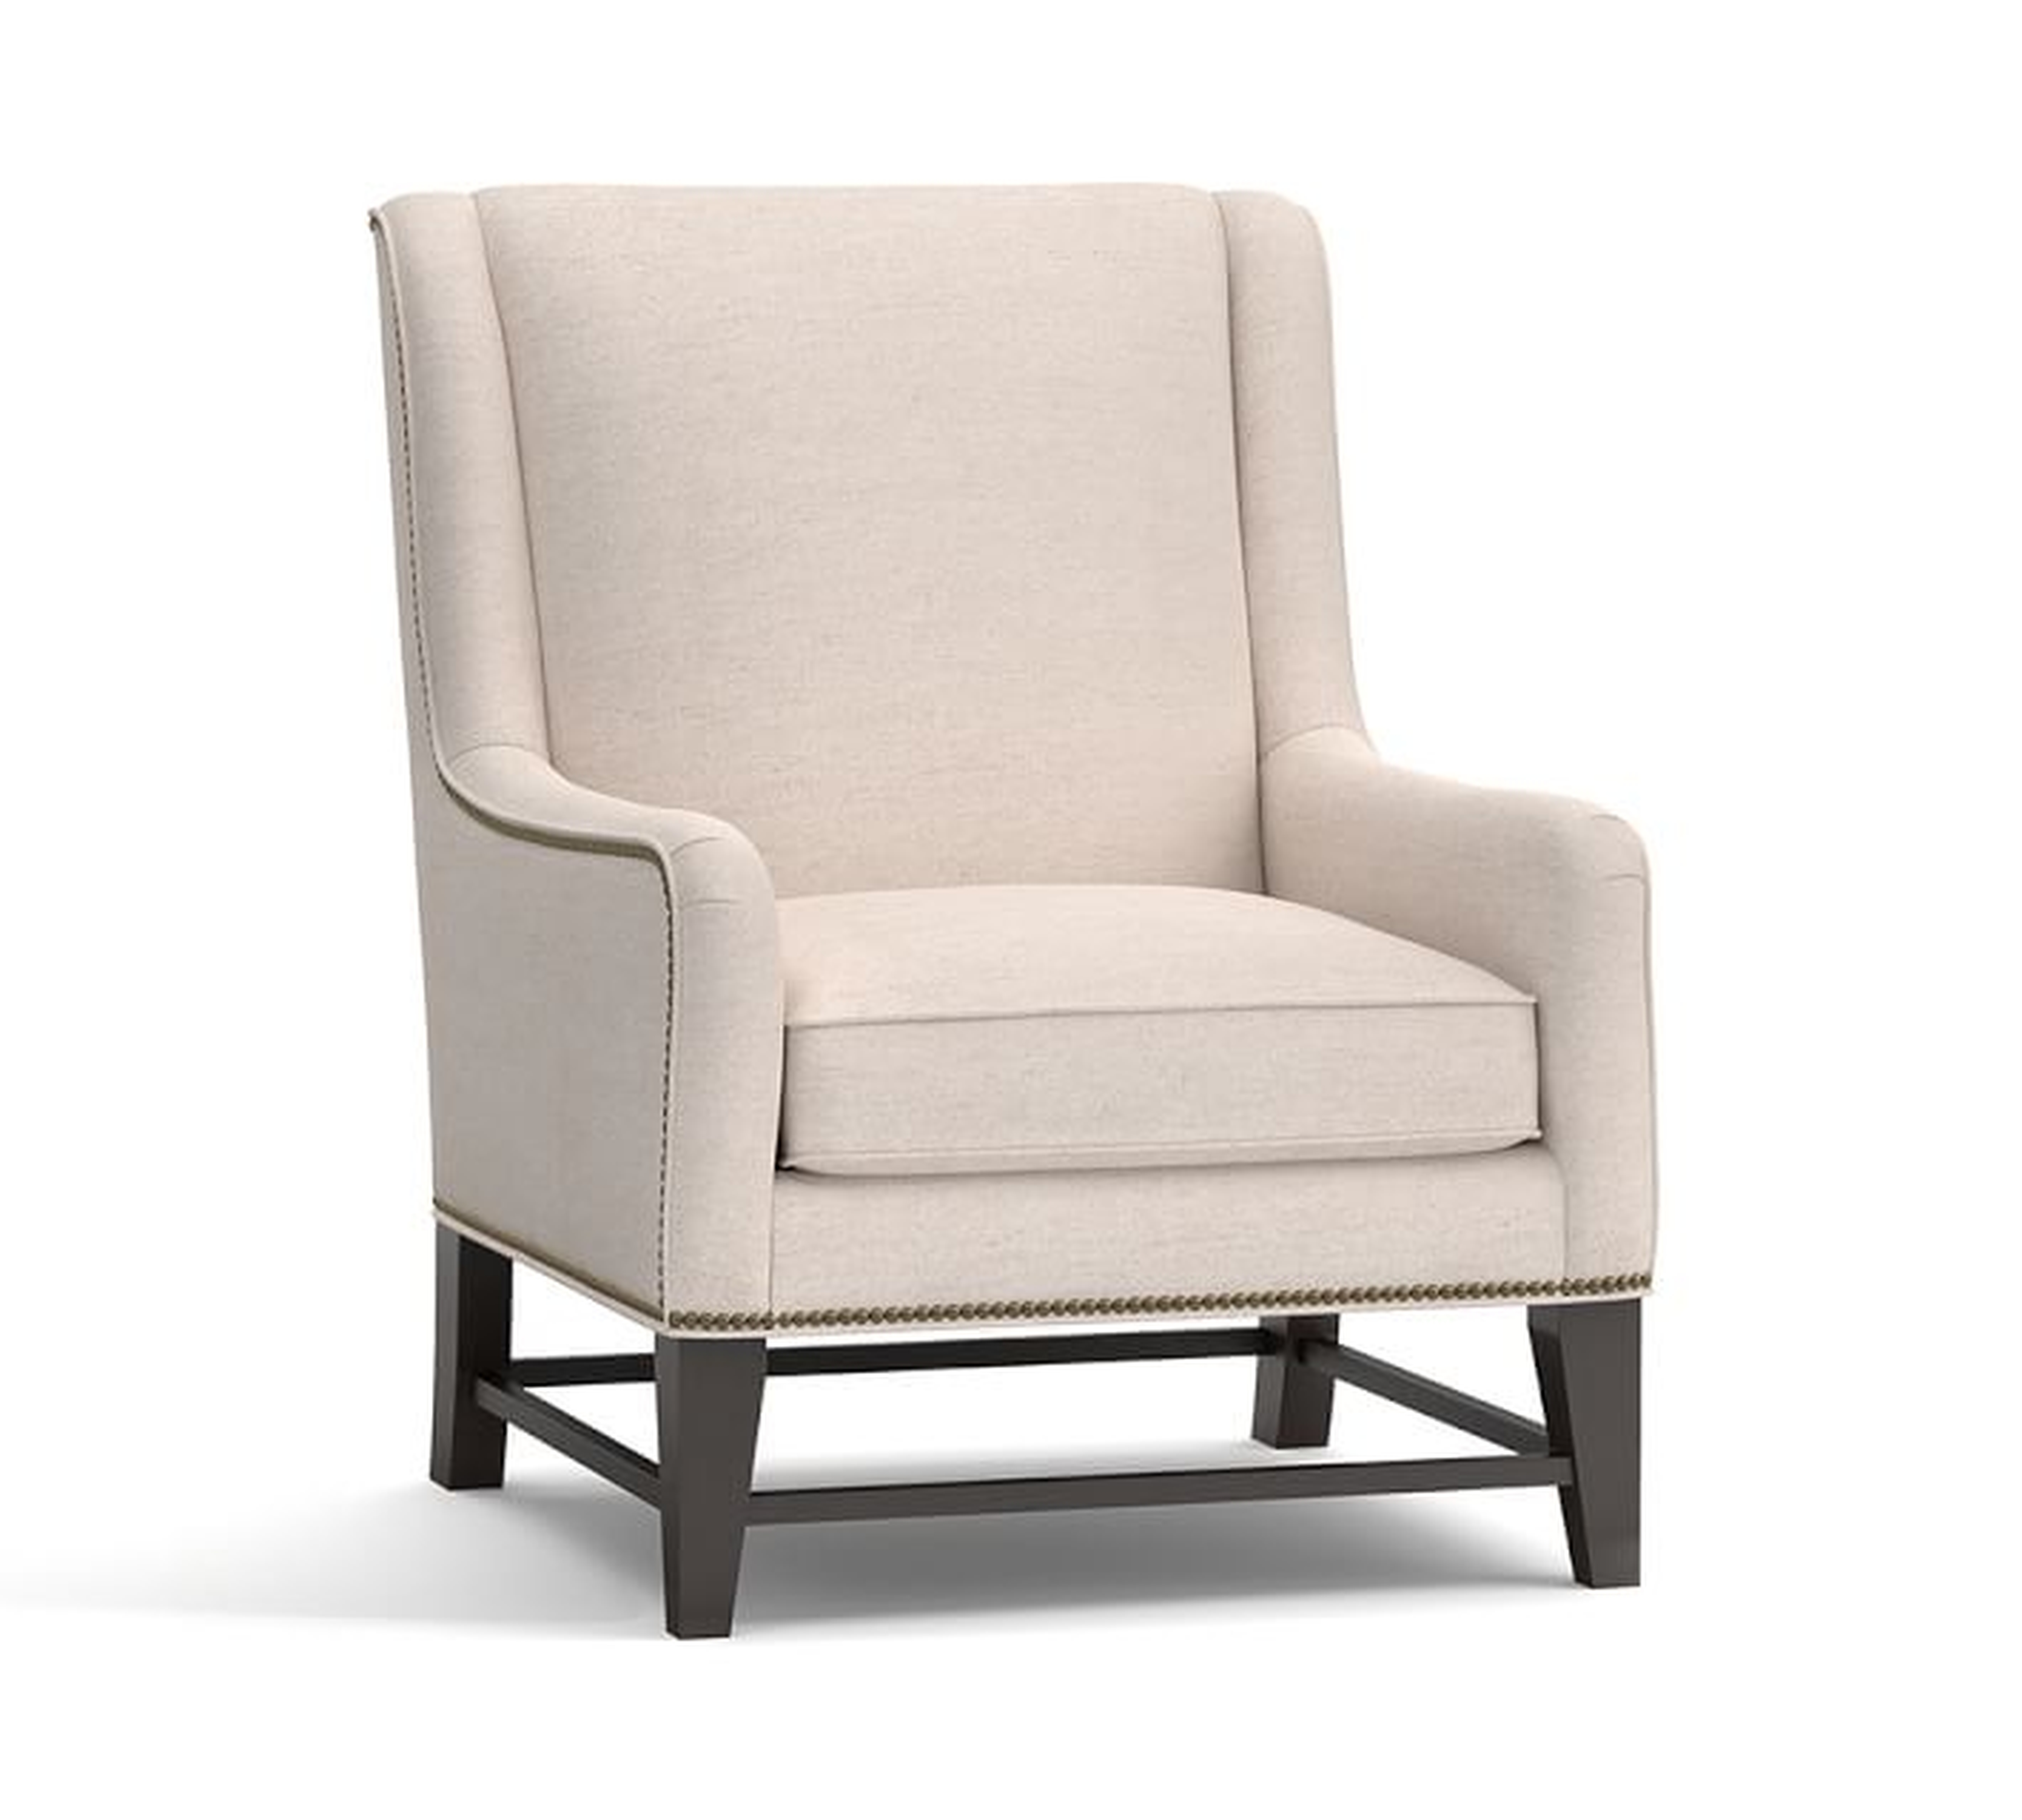 Berkeley Upholstered Armchair, Polyester Wrapped Cushions, Performance everydaylinen(TM) Oatmeal - Pottery Barn